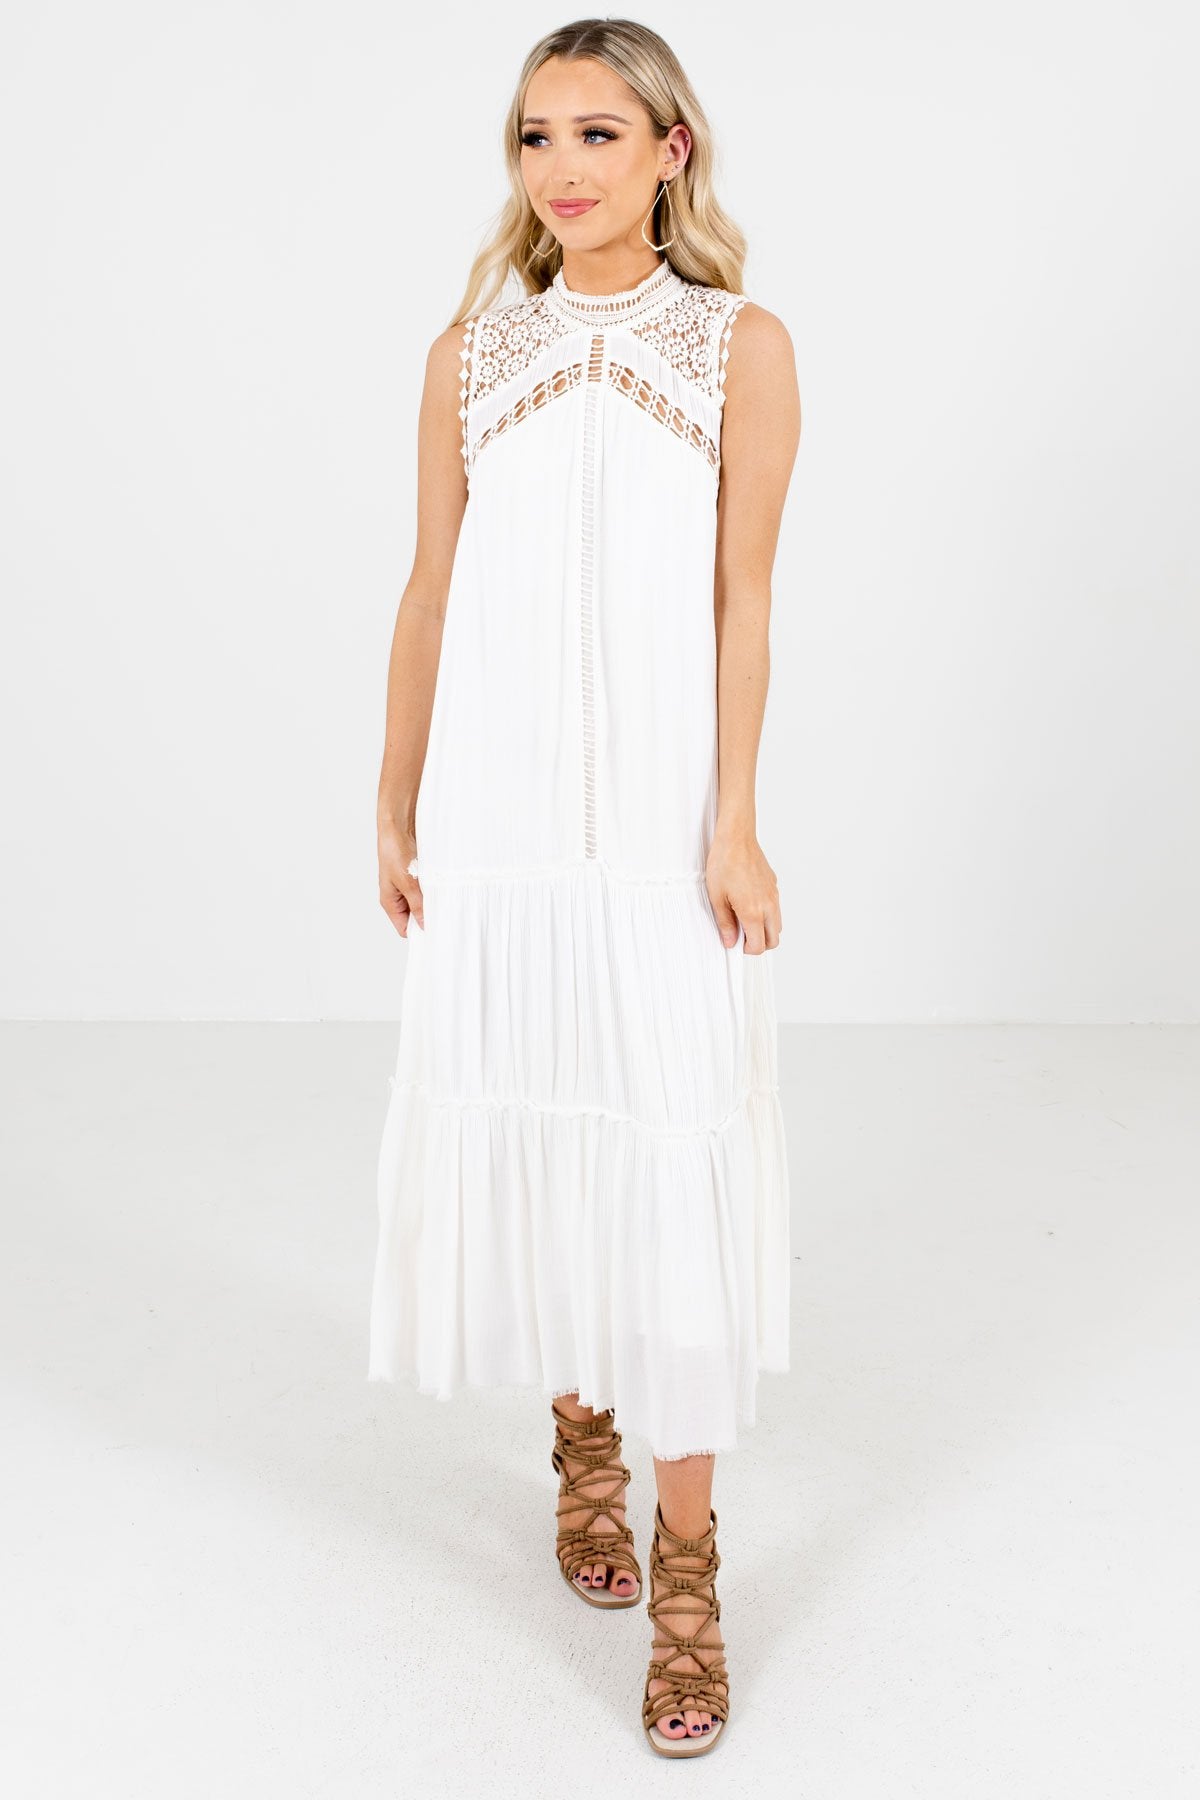 Leave it All Behind White Maxi Dress | Boutique Maxi Dresses - Bella ...